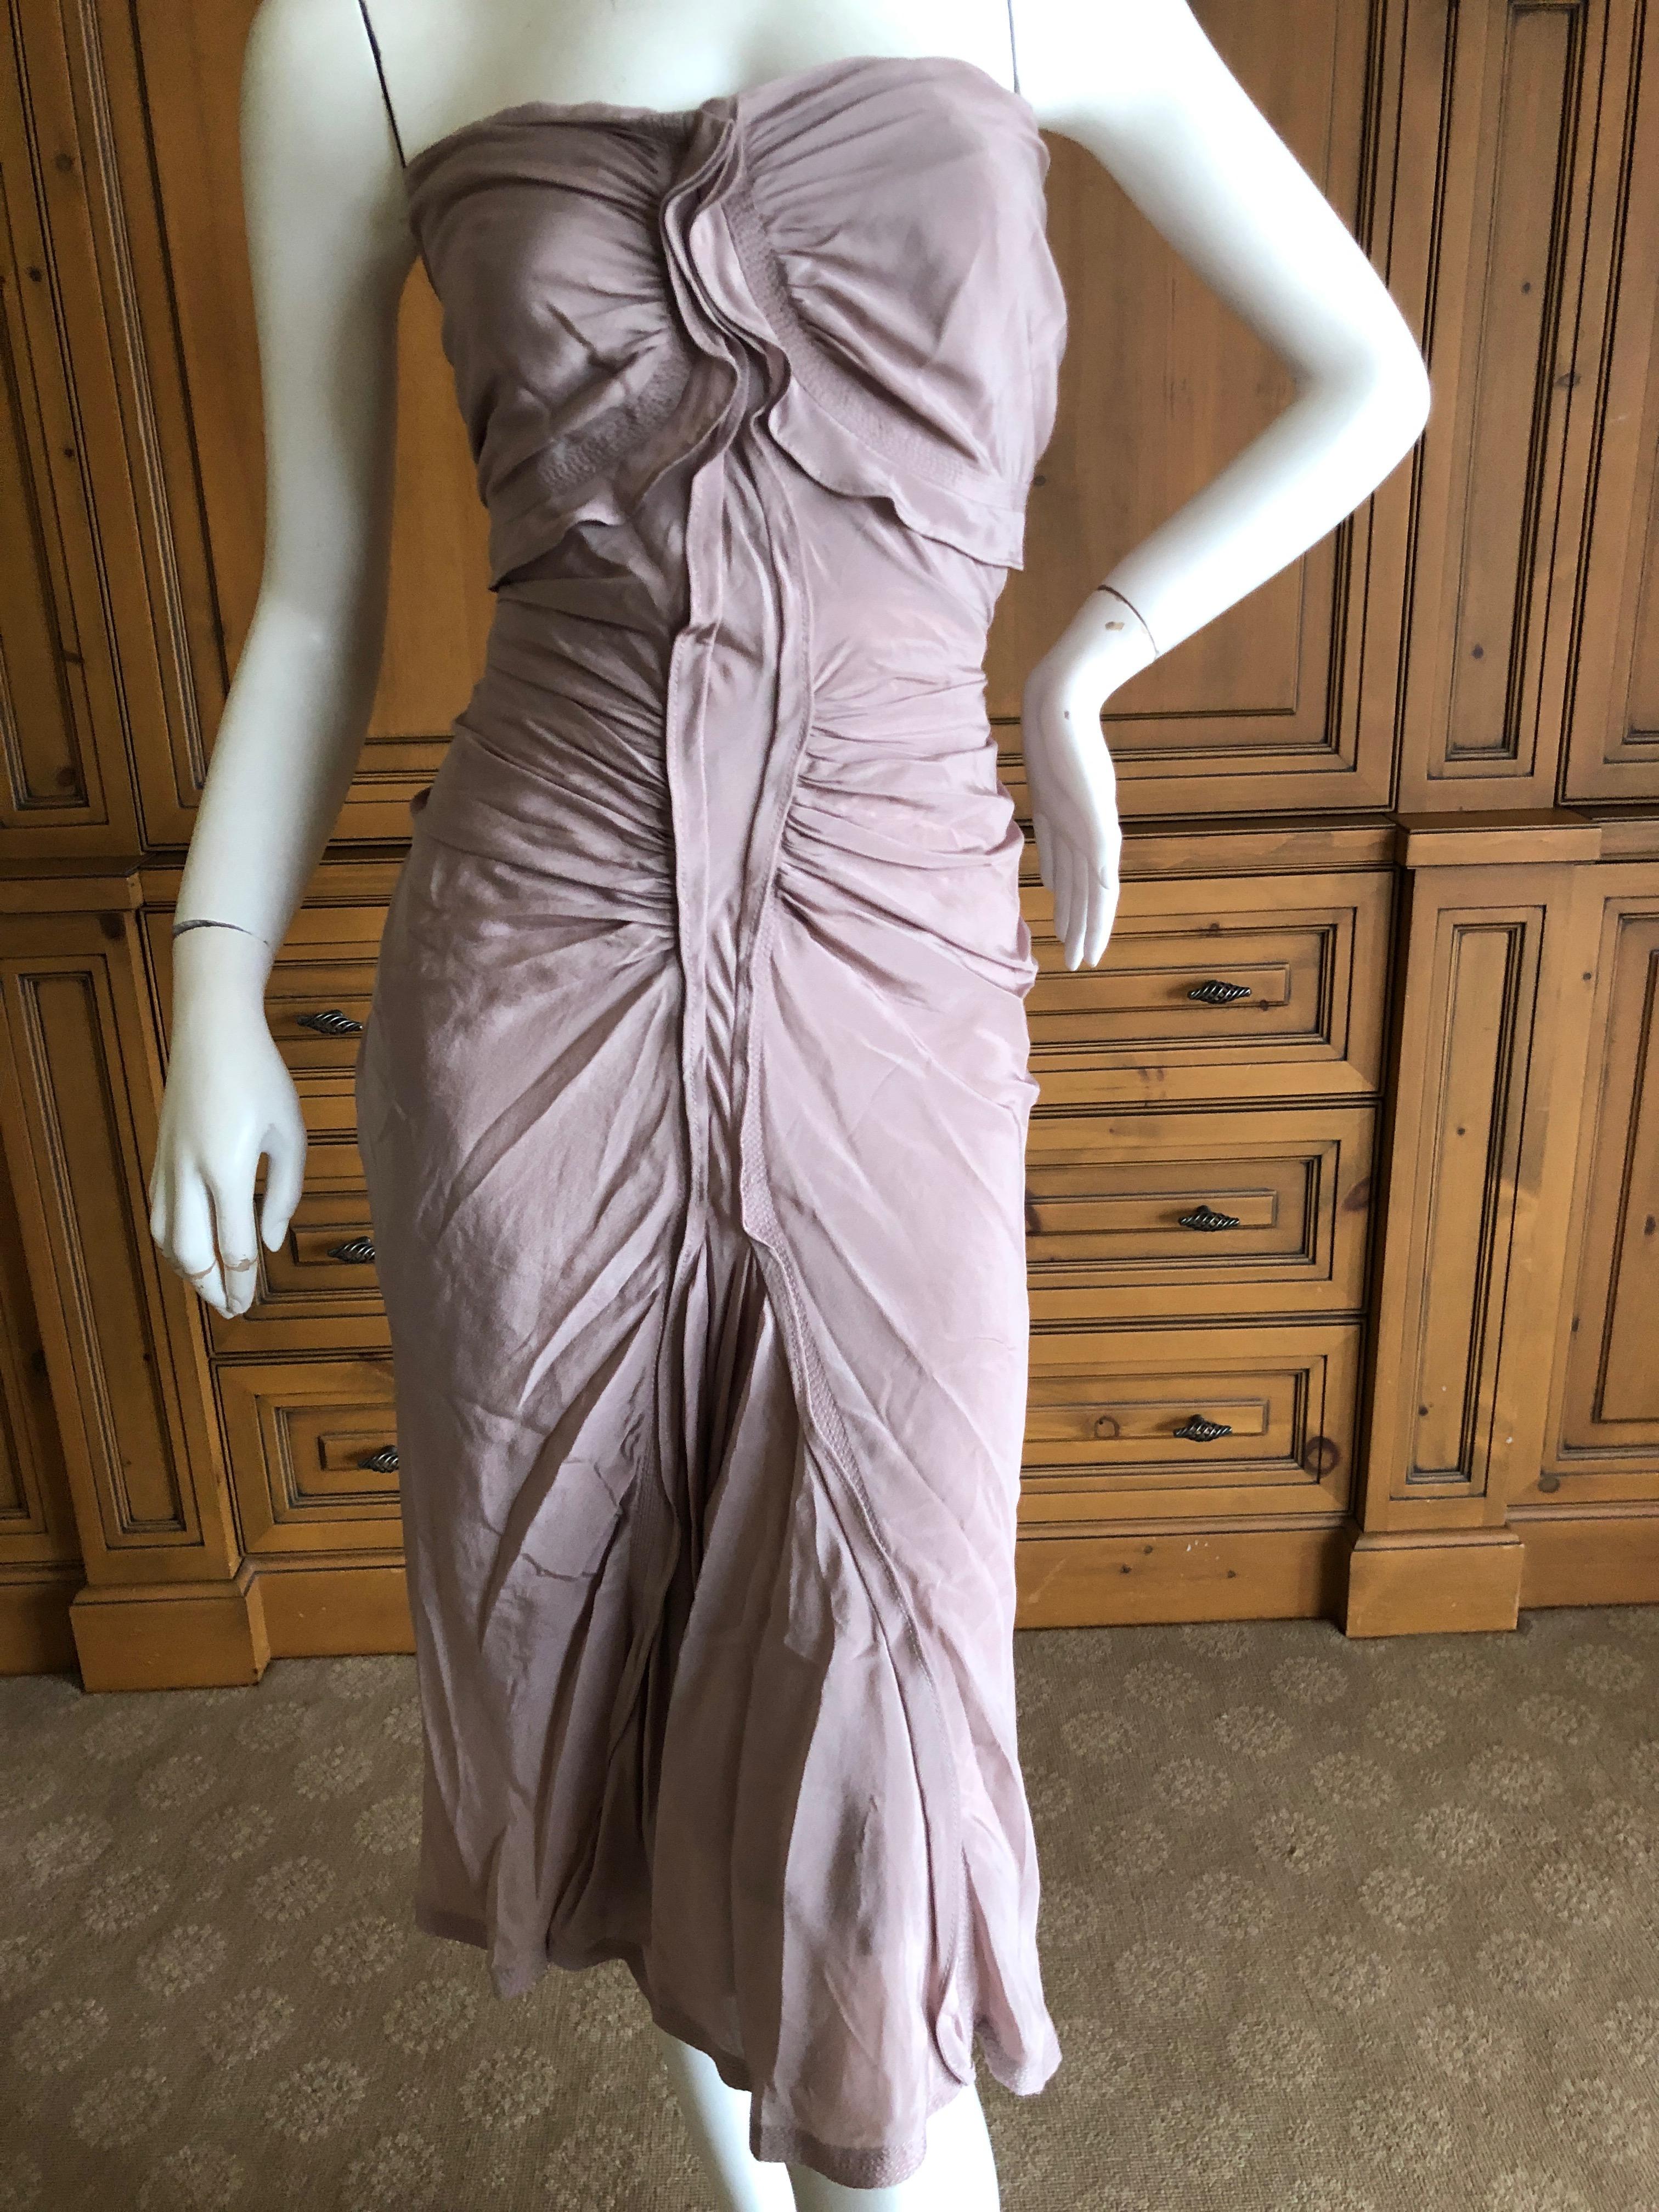 Yves Saint Laurent by Tom Ford 2003 Ruffled Strapless Mauve Silk  Dress 
French Size 42
Bust 35